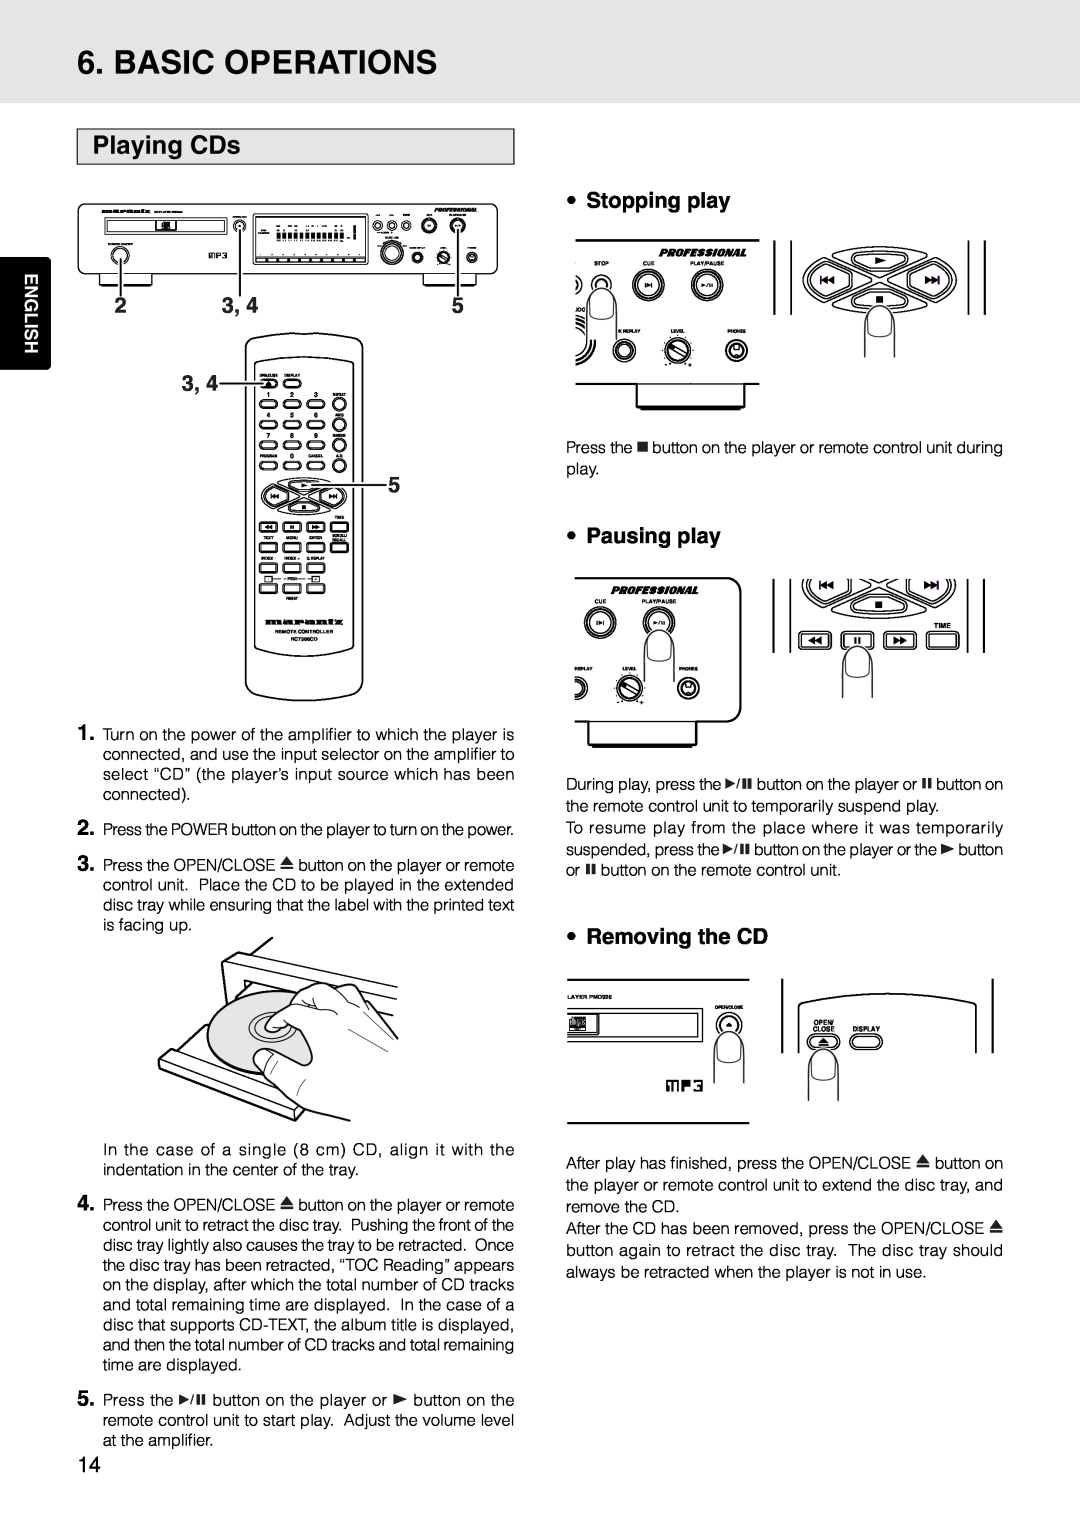 Marantz PMD325 manual Basic Operations, Playing CDs, •Stopping play, •Pausing play, •Removing the CD 